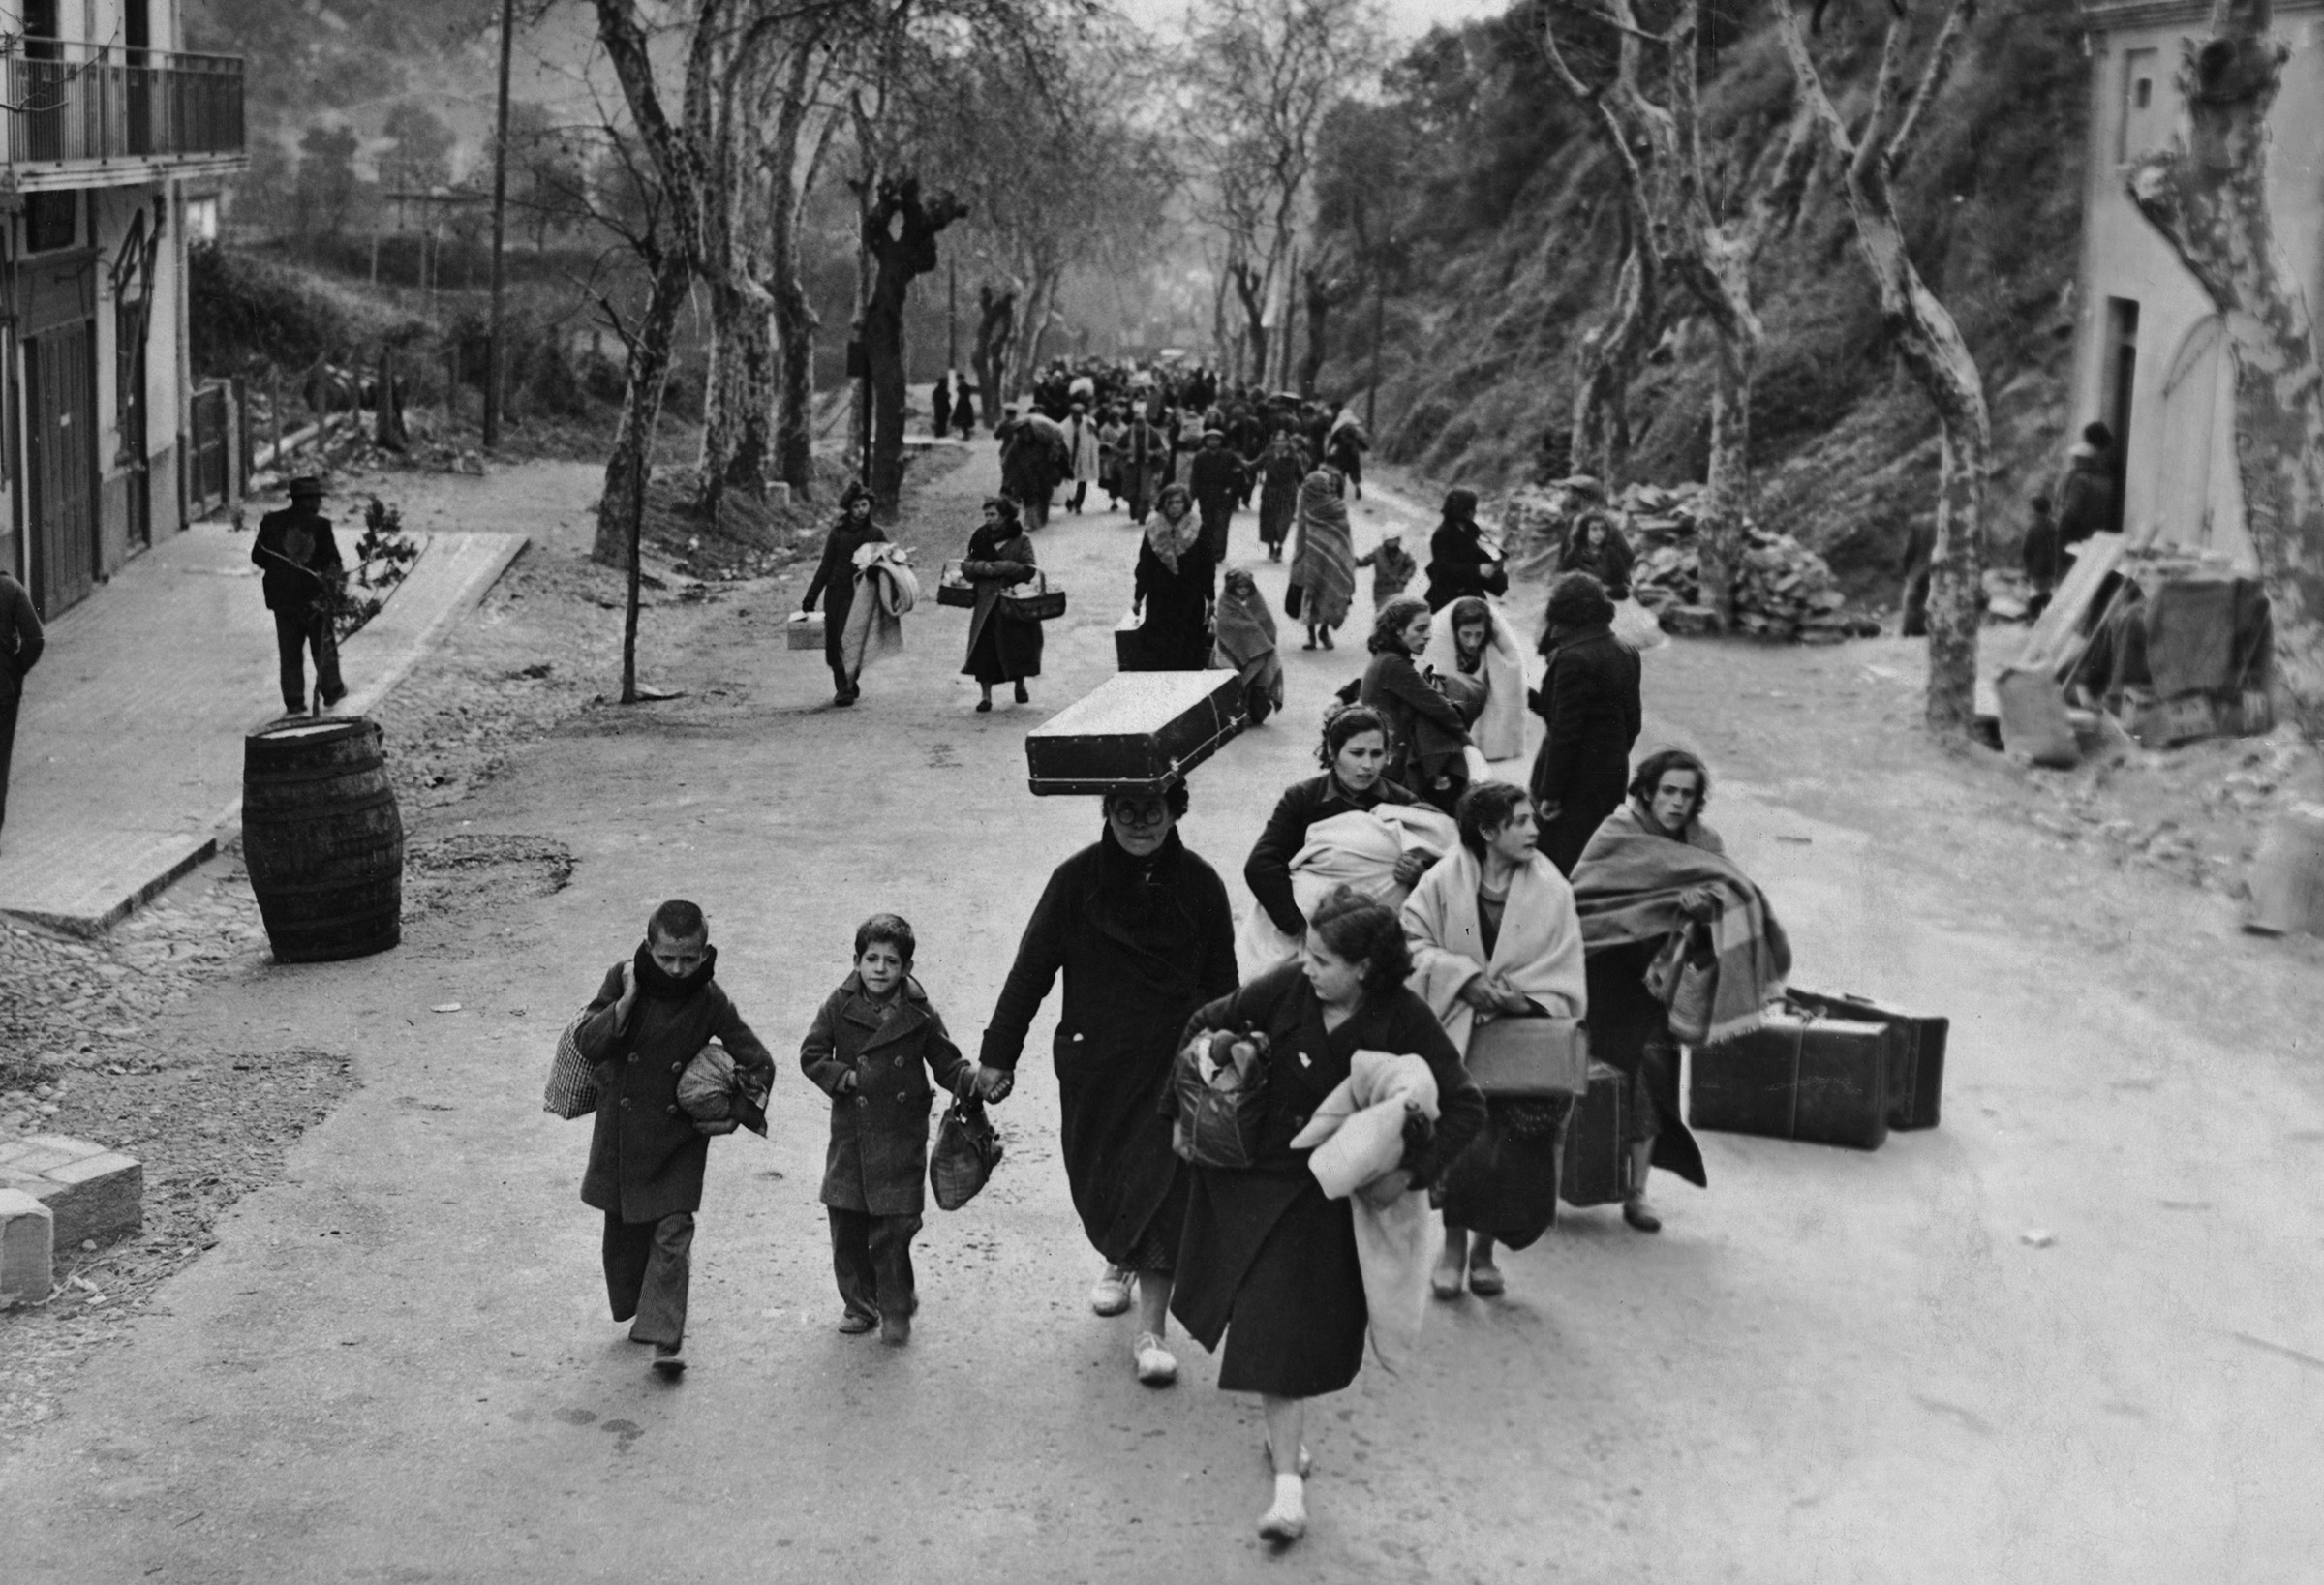 Refugees flee Paris in 1940. (FPG/Hulton Archive/Getty Images)